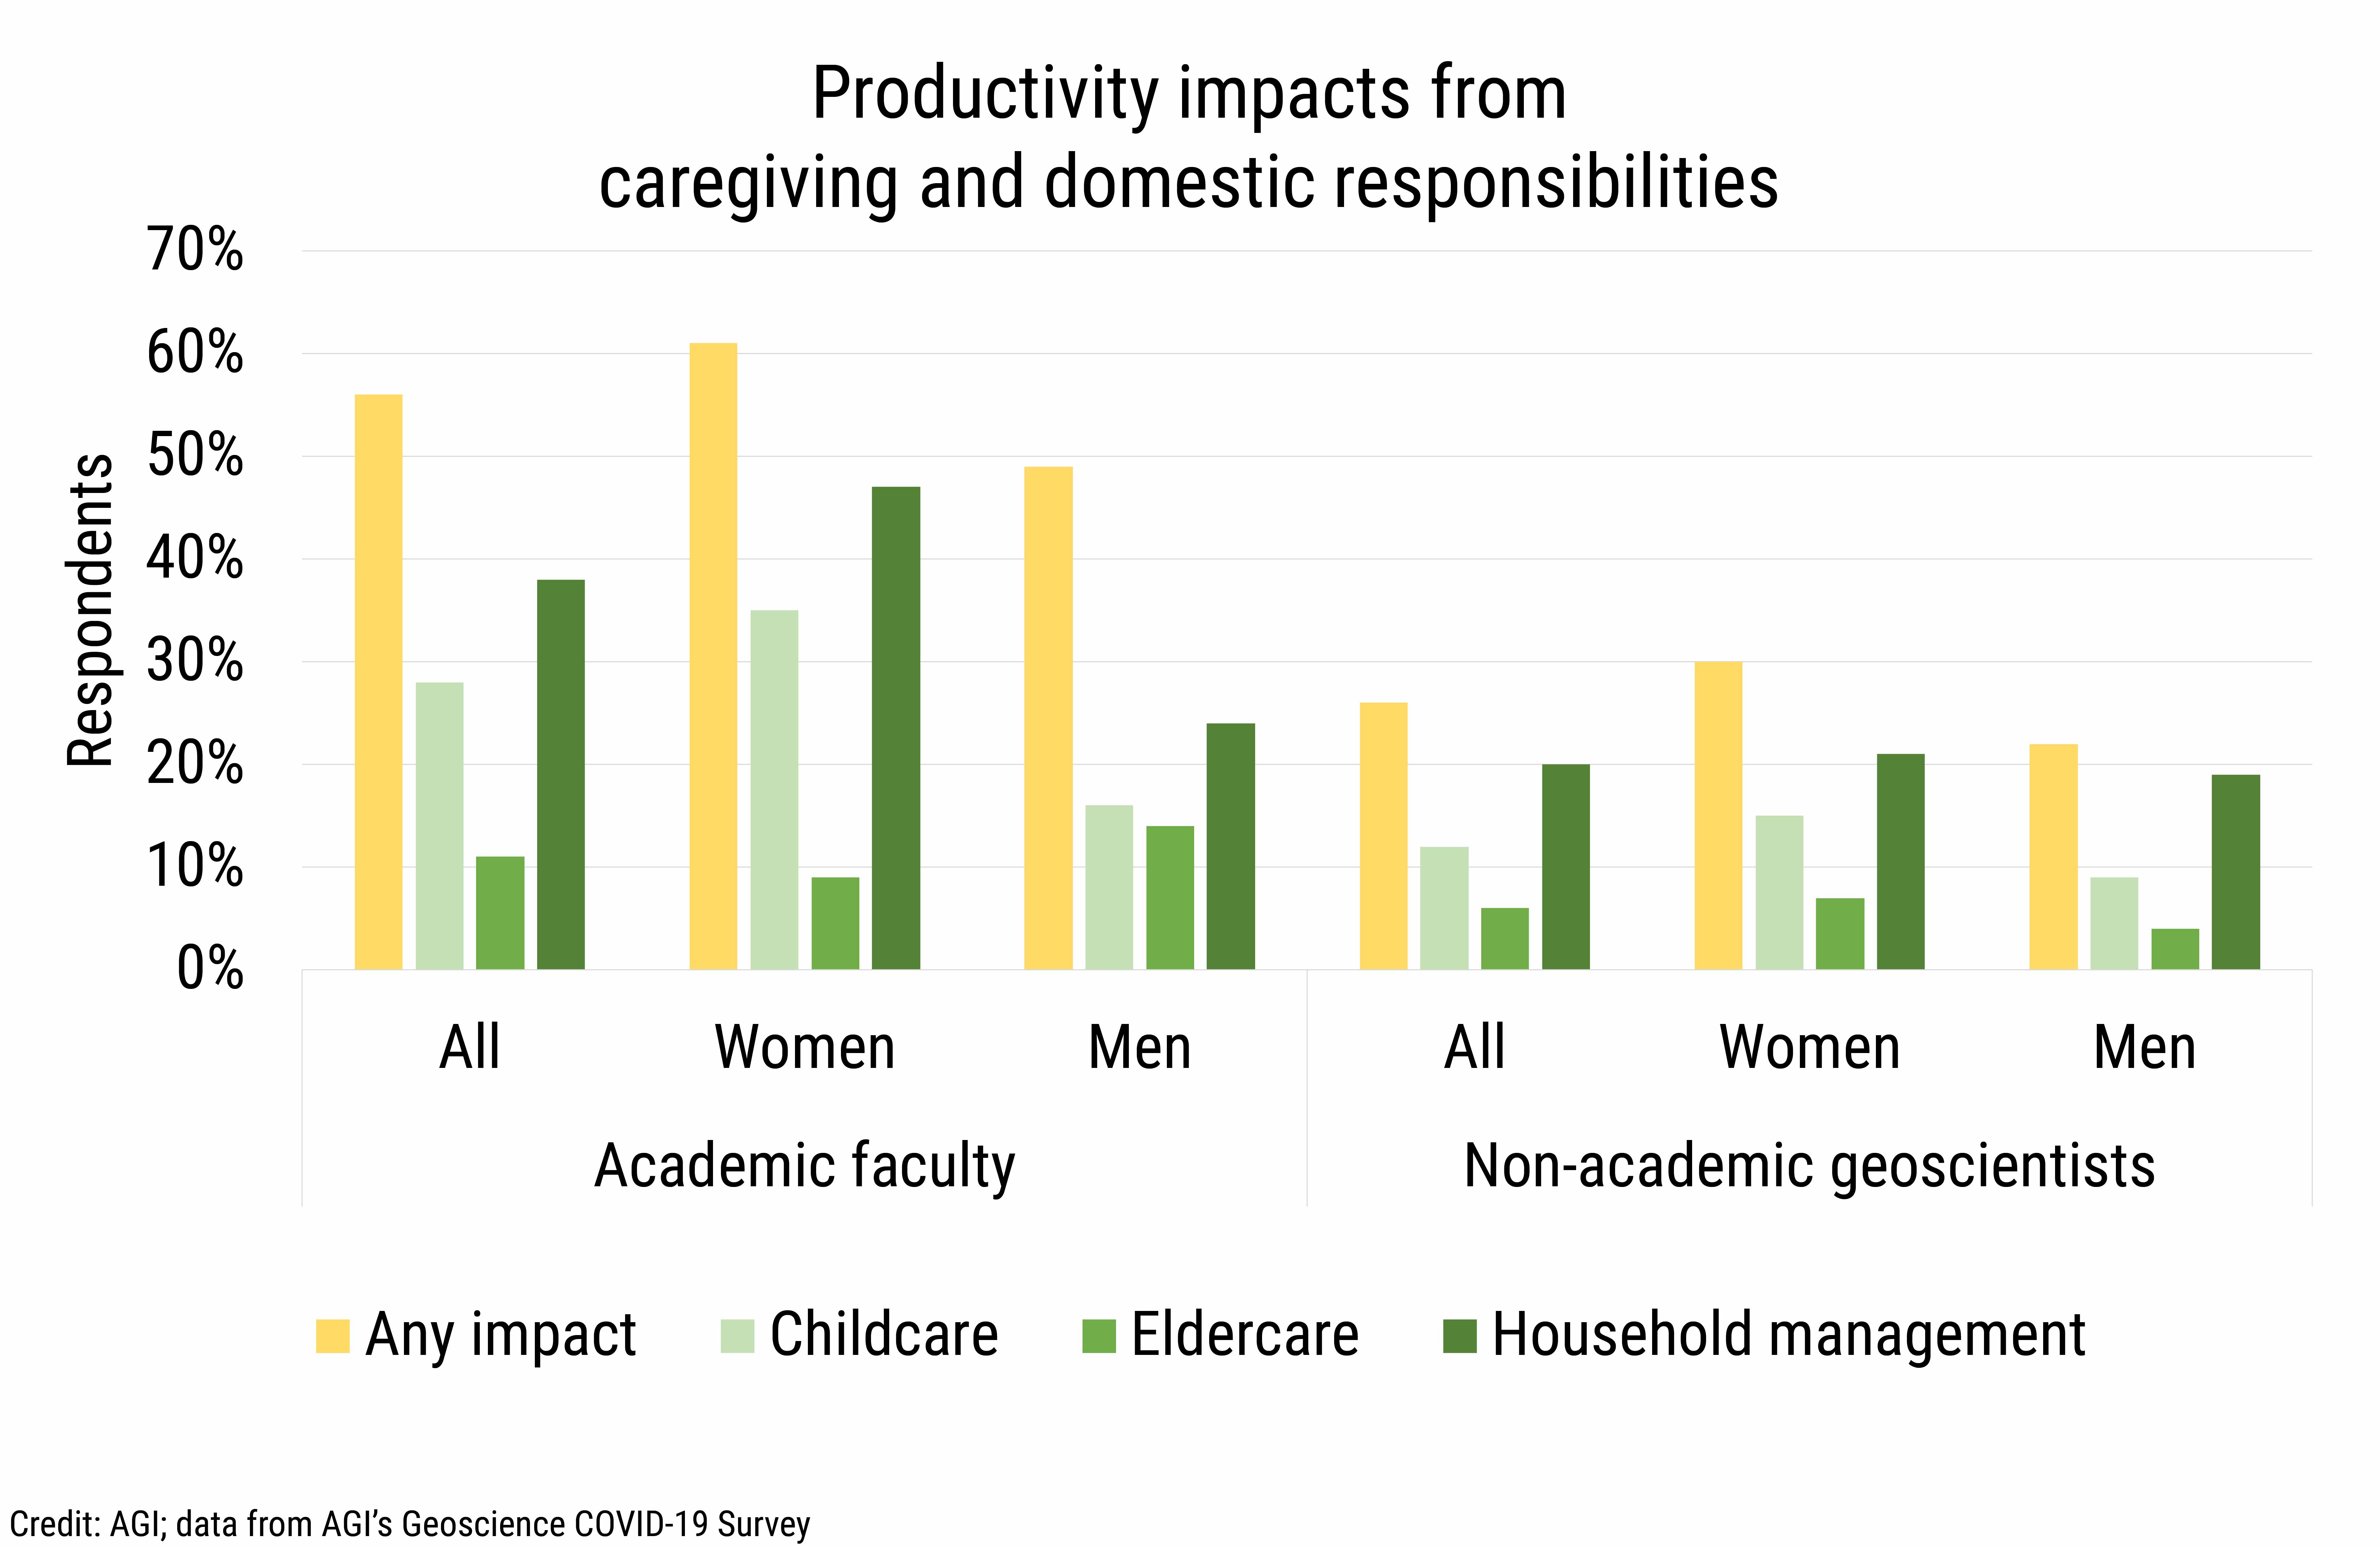 DB_2021-020 chart 01: Productivity impacts from caregiving and domestic responsibilities (Credit: AGI; data from AGI&#039;s Geoscience COVID-19 Survey)